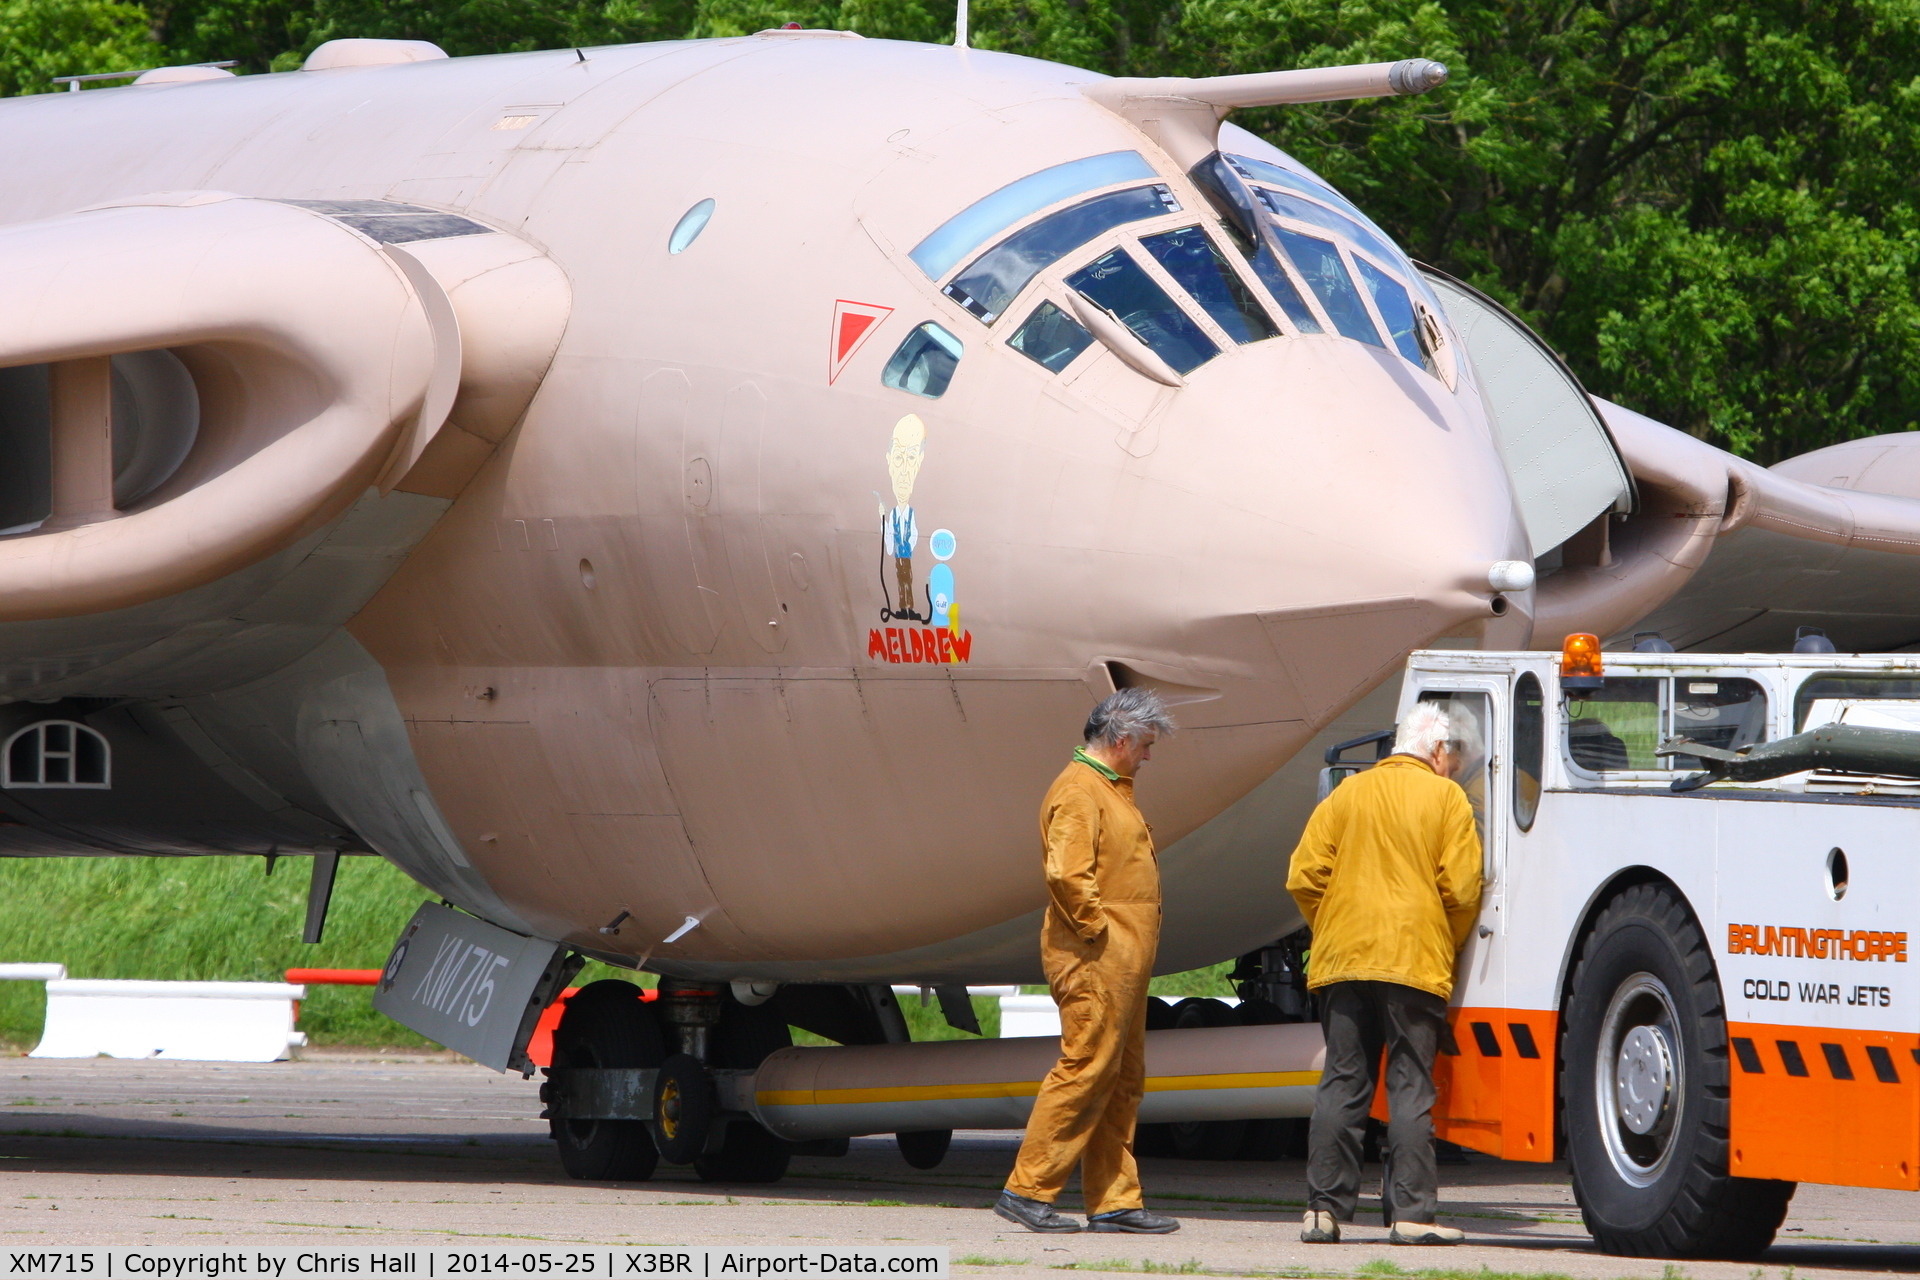 XM715, 1963 Handley Page Victor K.2 C/N HP80/83, at the Cold War Jets Open Day 2014